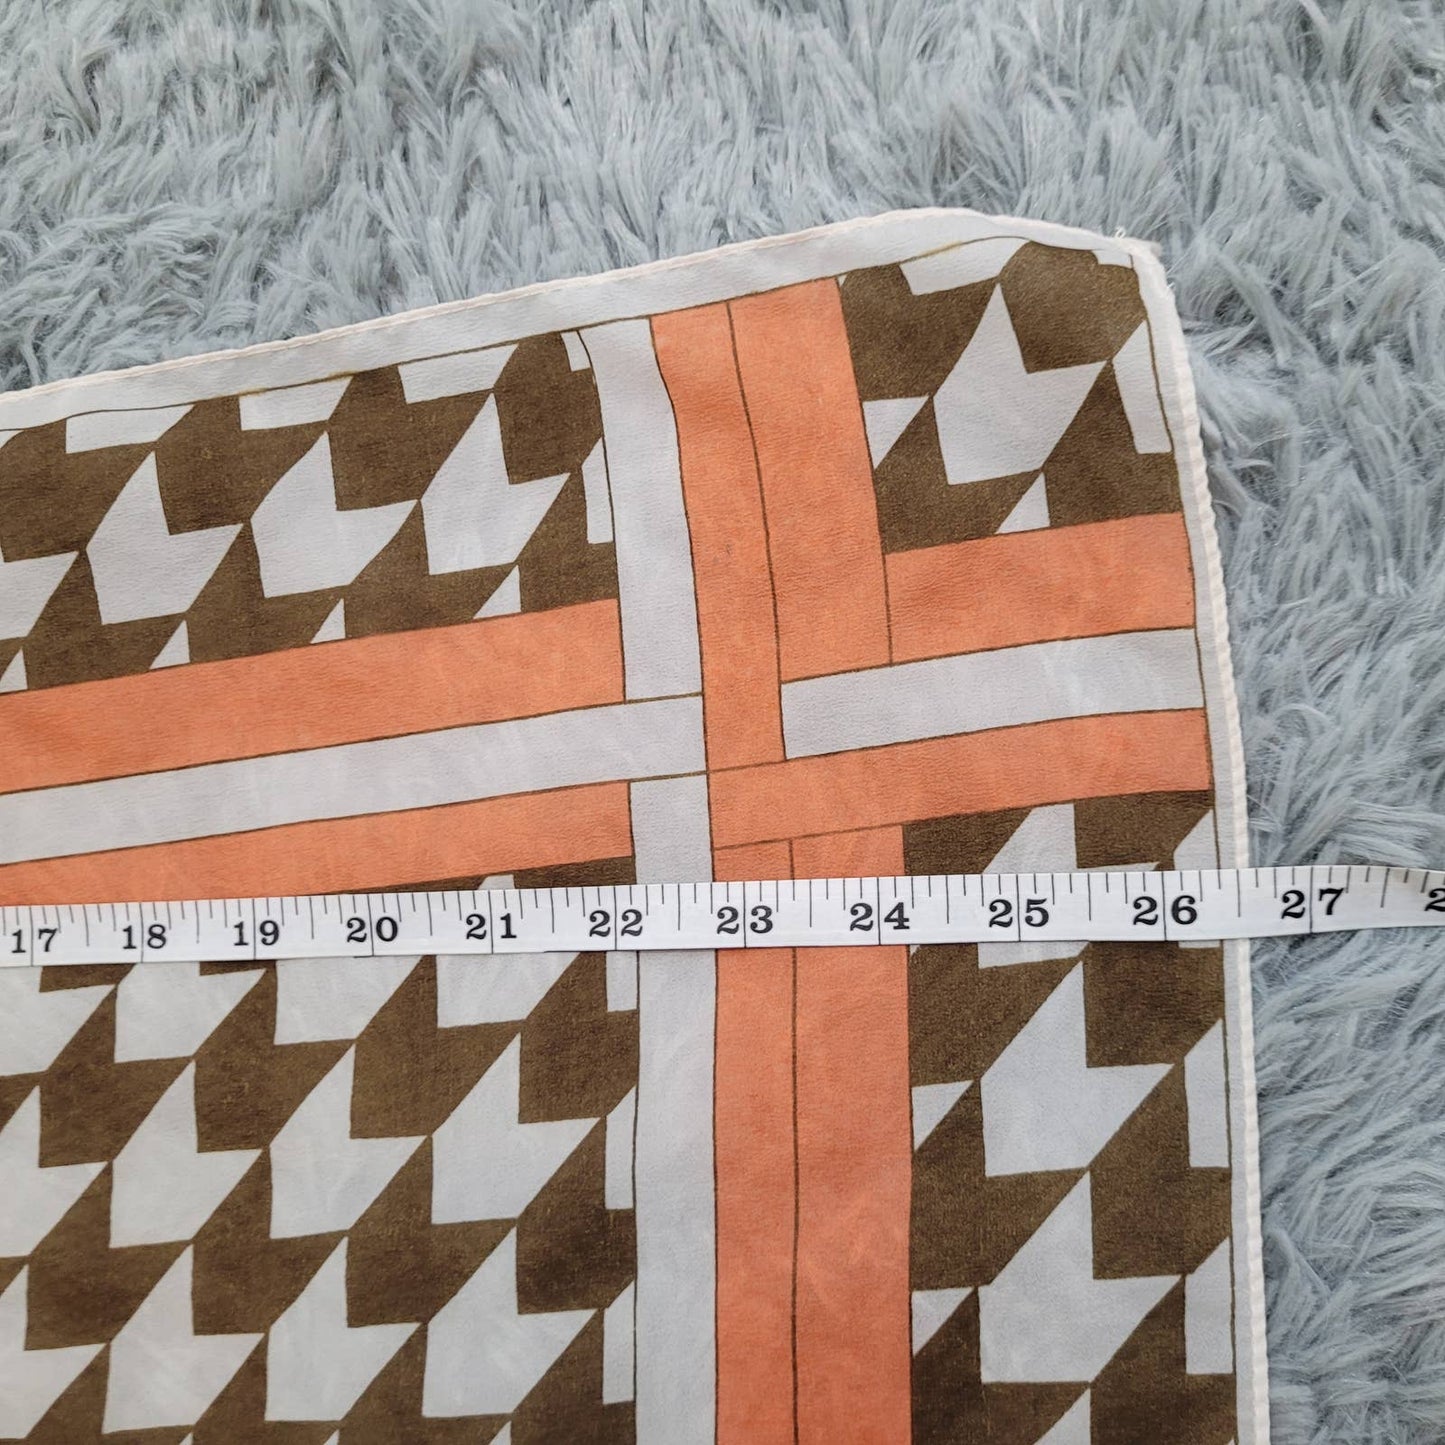 Square Scarf with Chevron / Houndstooth Pattern in Brown, Orange, and White